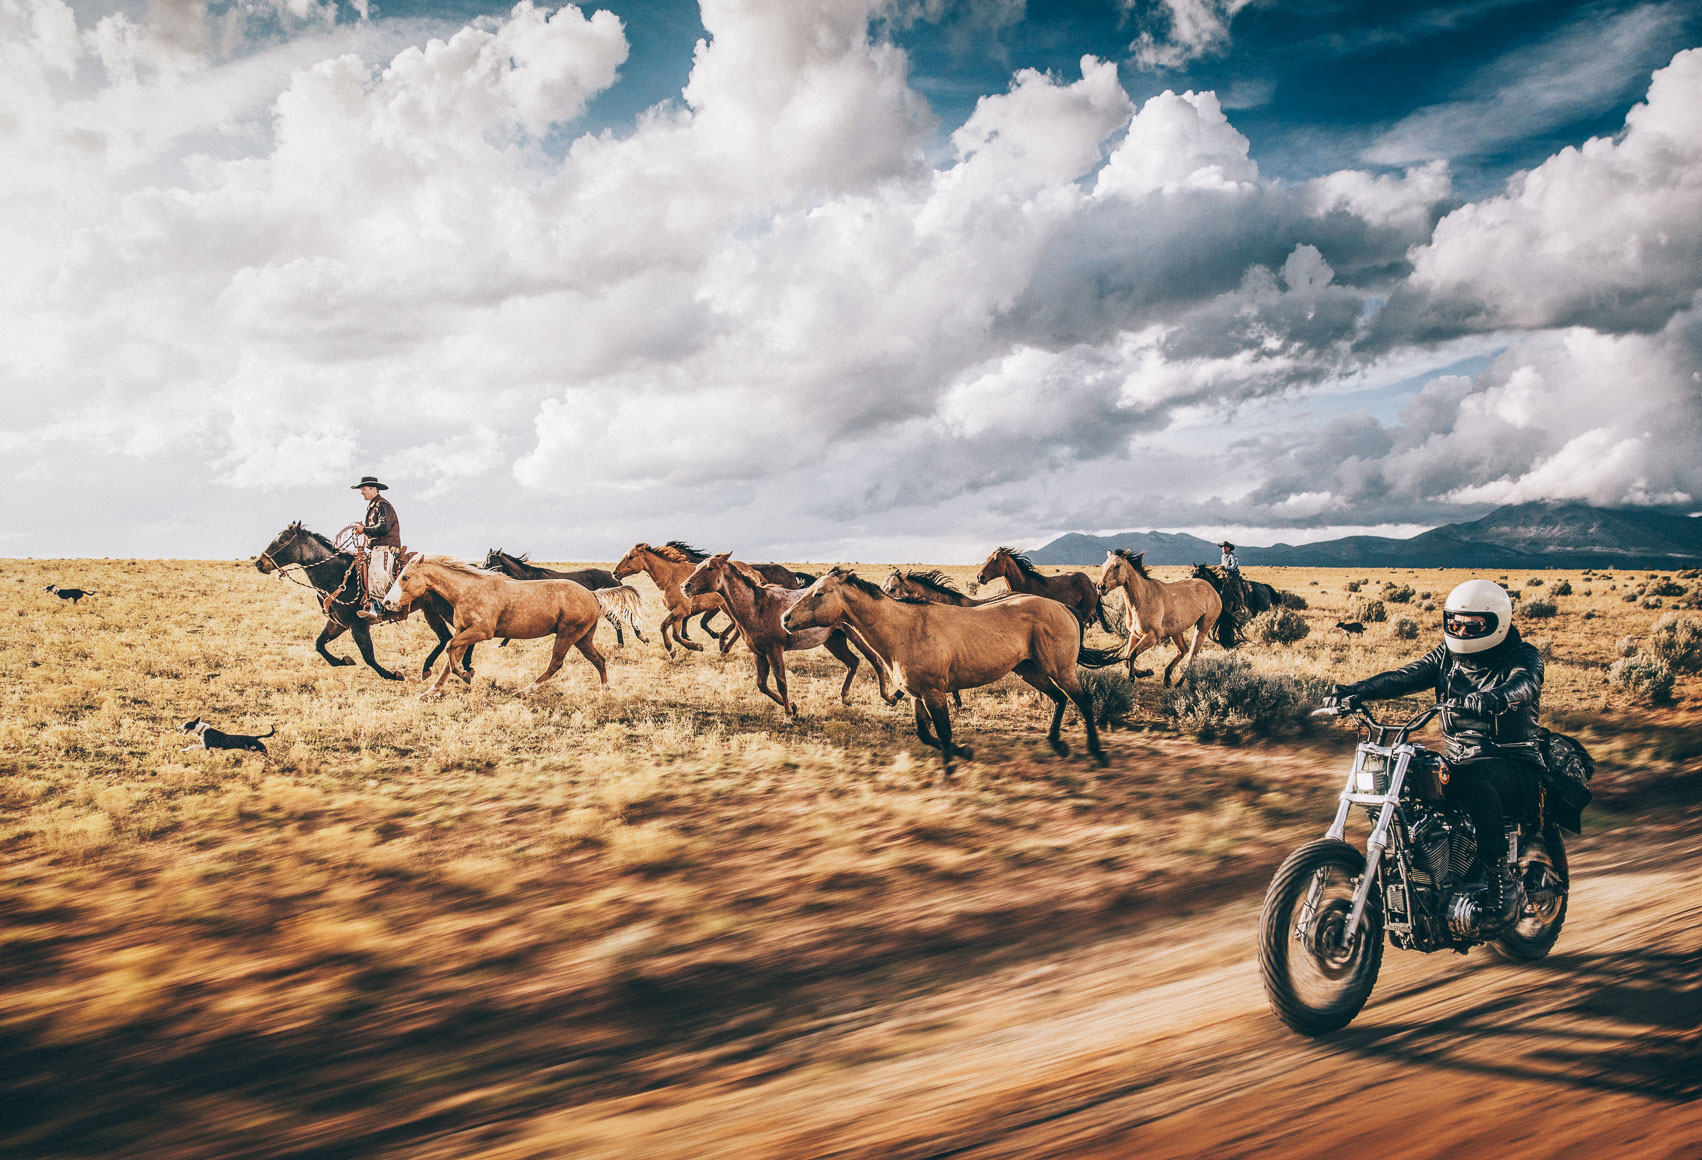 Horse Power Vs Horse Power |Michael Kunde Photo | Utah Tourism | Road to Mighty | Overview